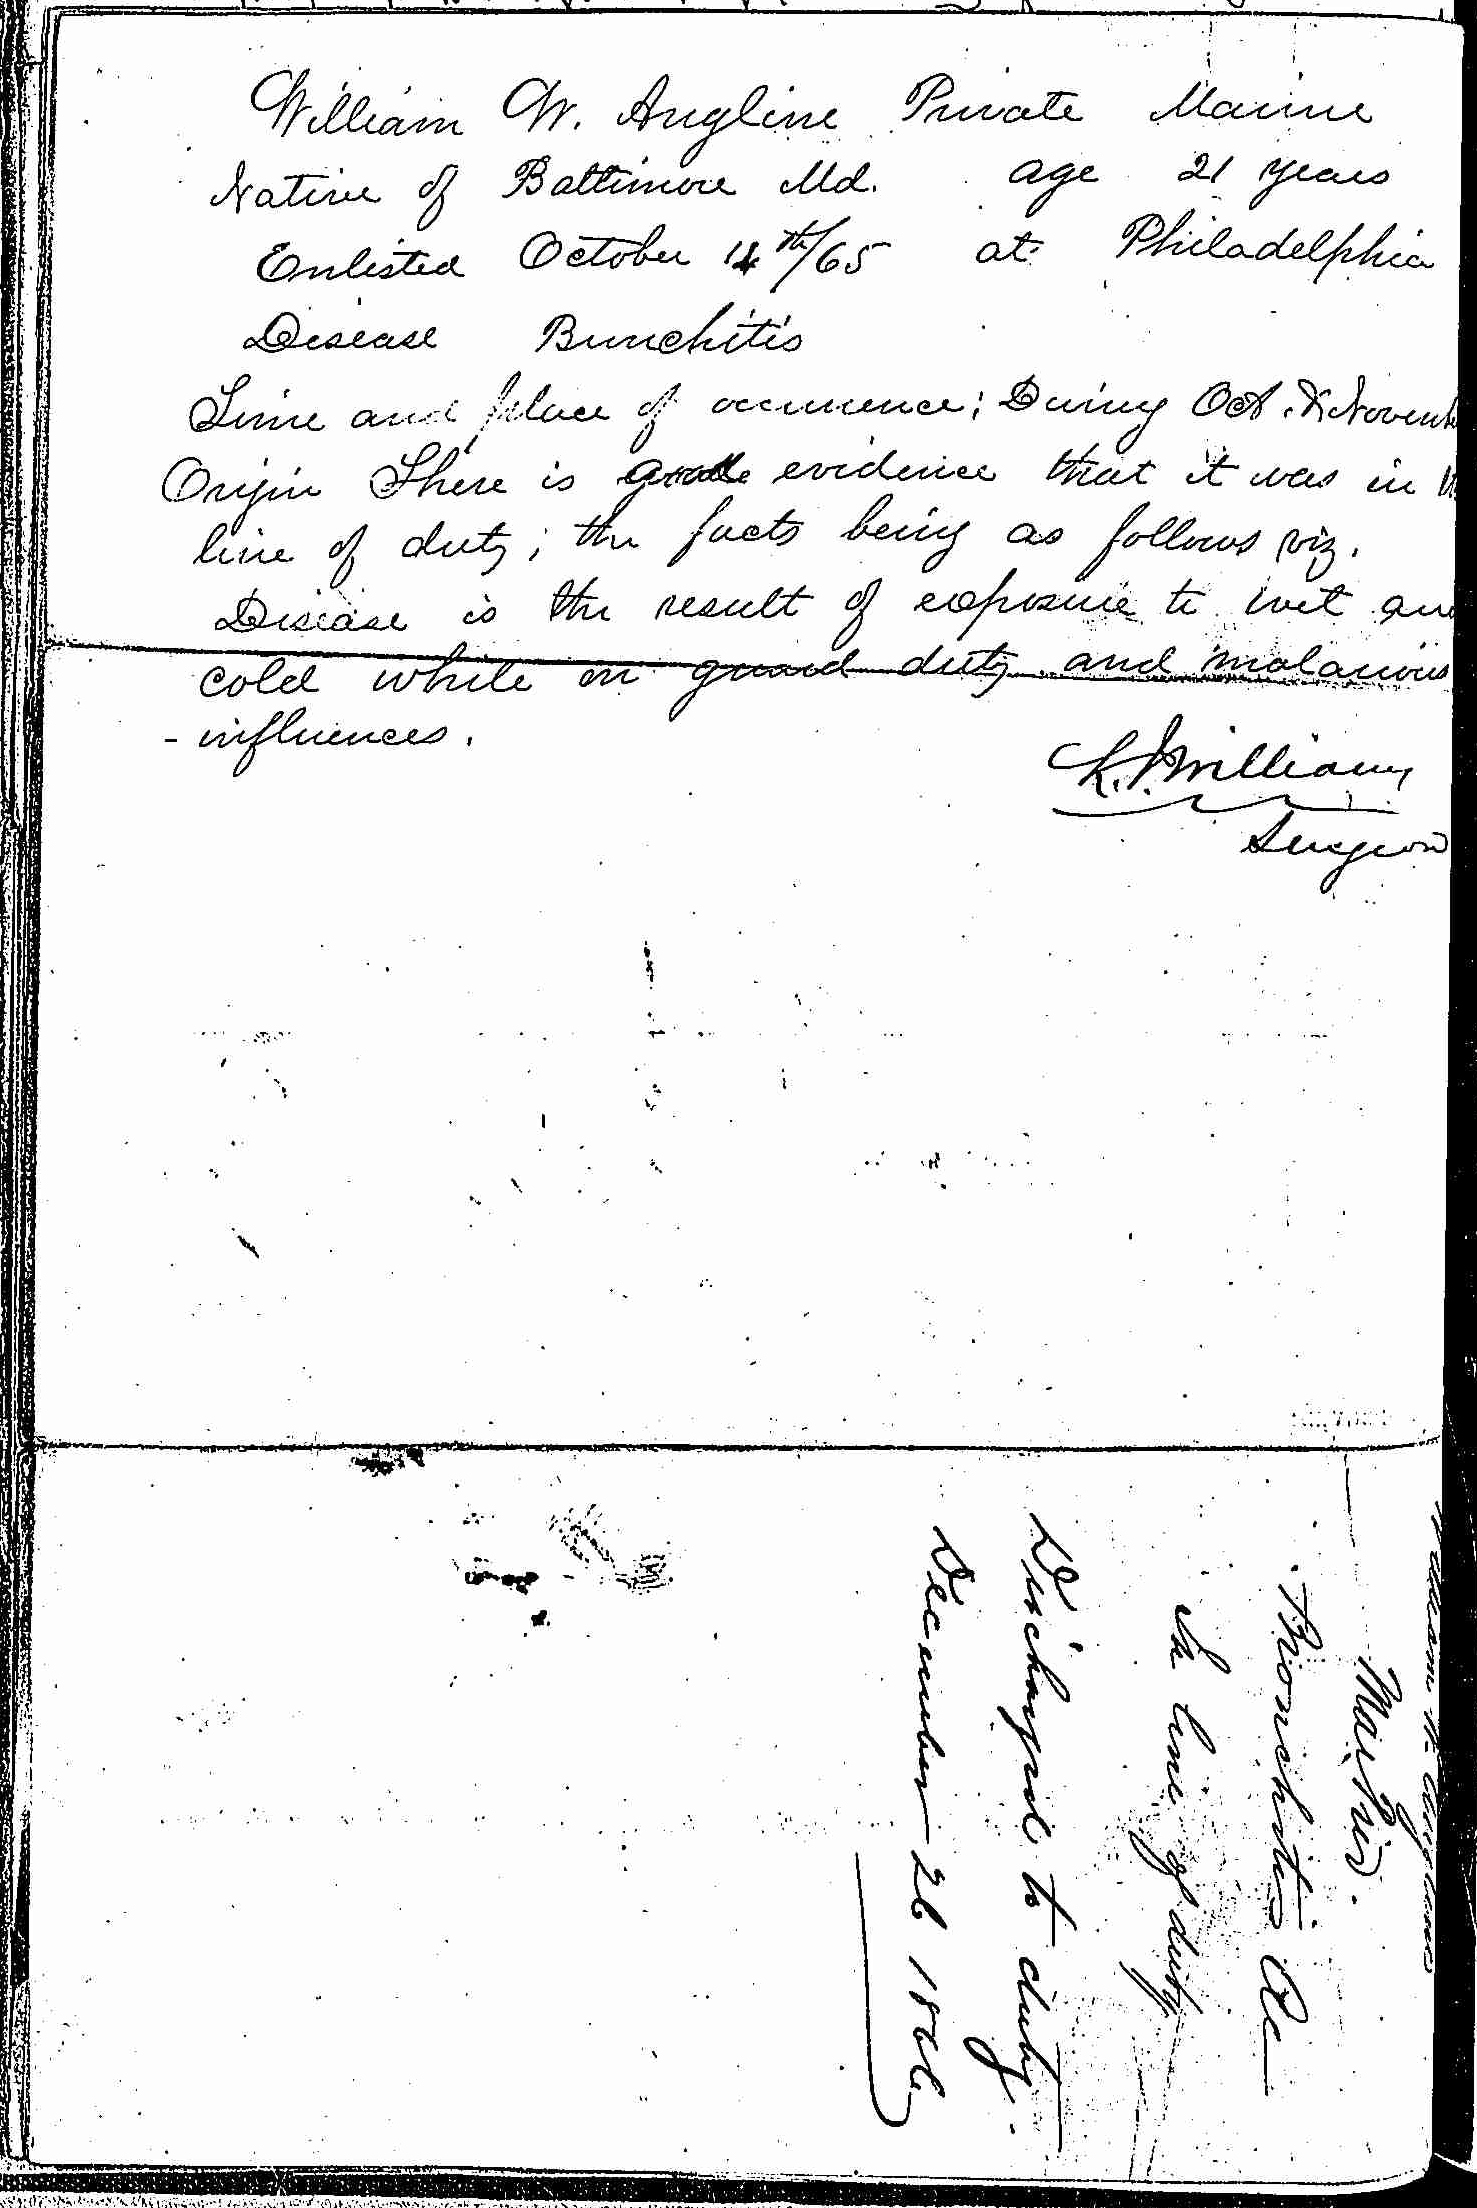 Entry for William W. Angline (first admission page 2 of 2) in the log Hospital Tickets and Case Papers - Naval Hospital - Washington, D.C. - 1865-68